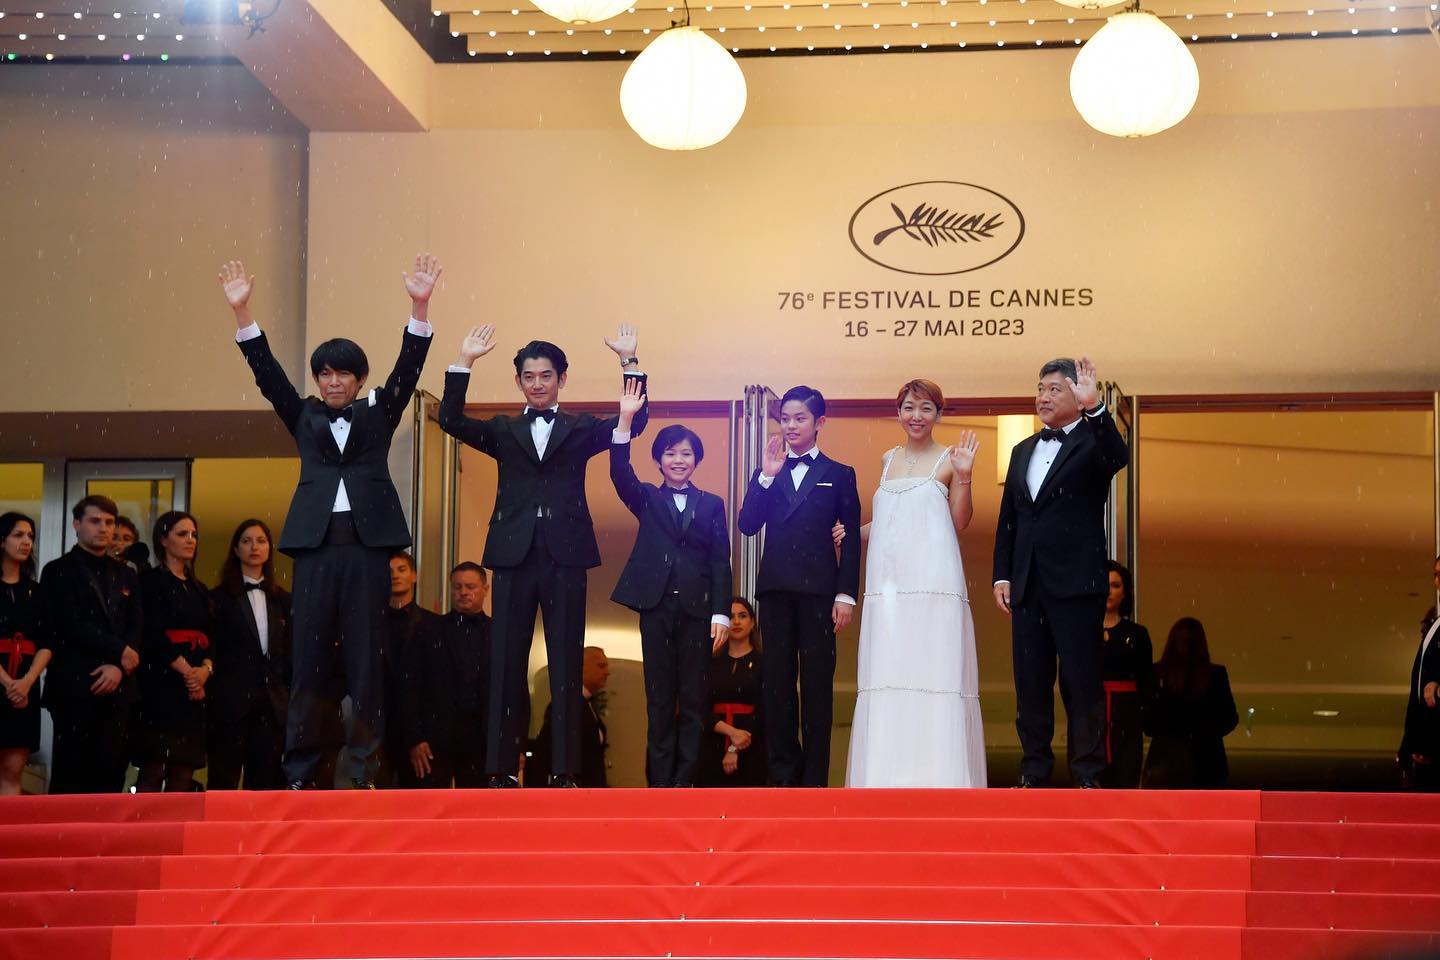 _
Hirokazu Kore-eda's latest feature ( ), co-financed and produced by AOI Pro., was screened at the 2023 @festivaldecannes 

𝘒𝘢𝘪𝘣𝘶𝘵𝘴𝘶 received a 9.5-minute standing ovation

The film was the first time director Hirokazu Kore-eda and scriptwriter teamed up, with music by .

2023 Monster Film Committee